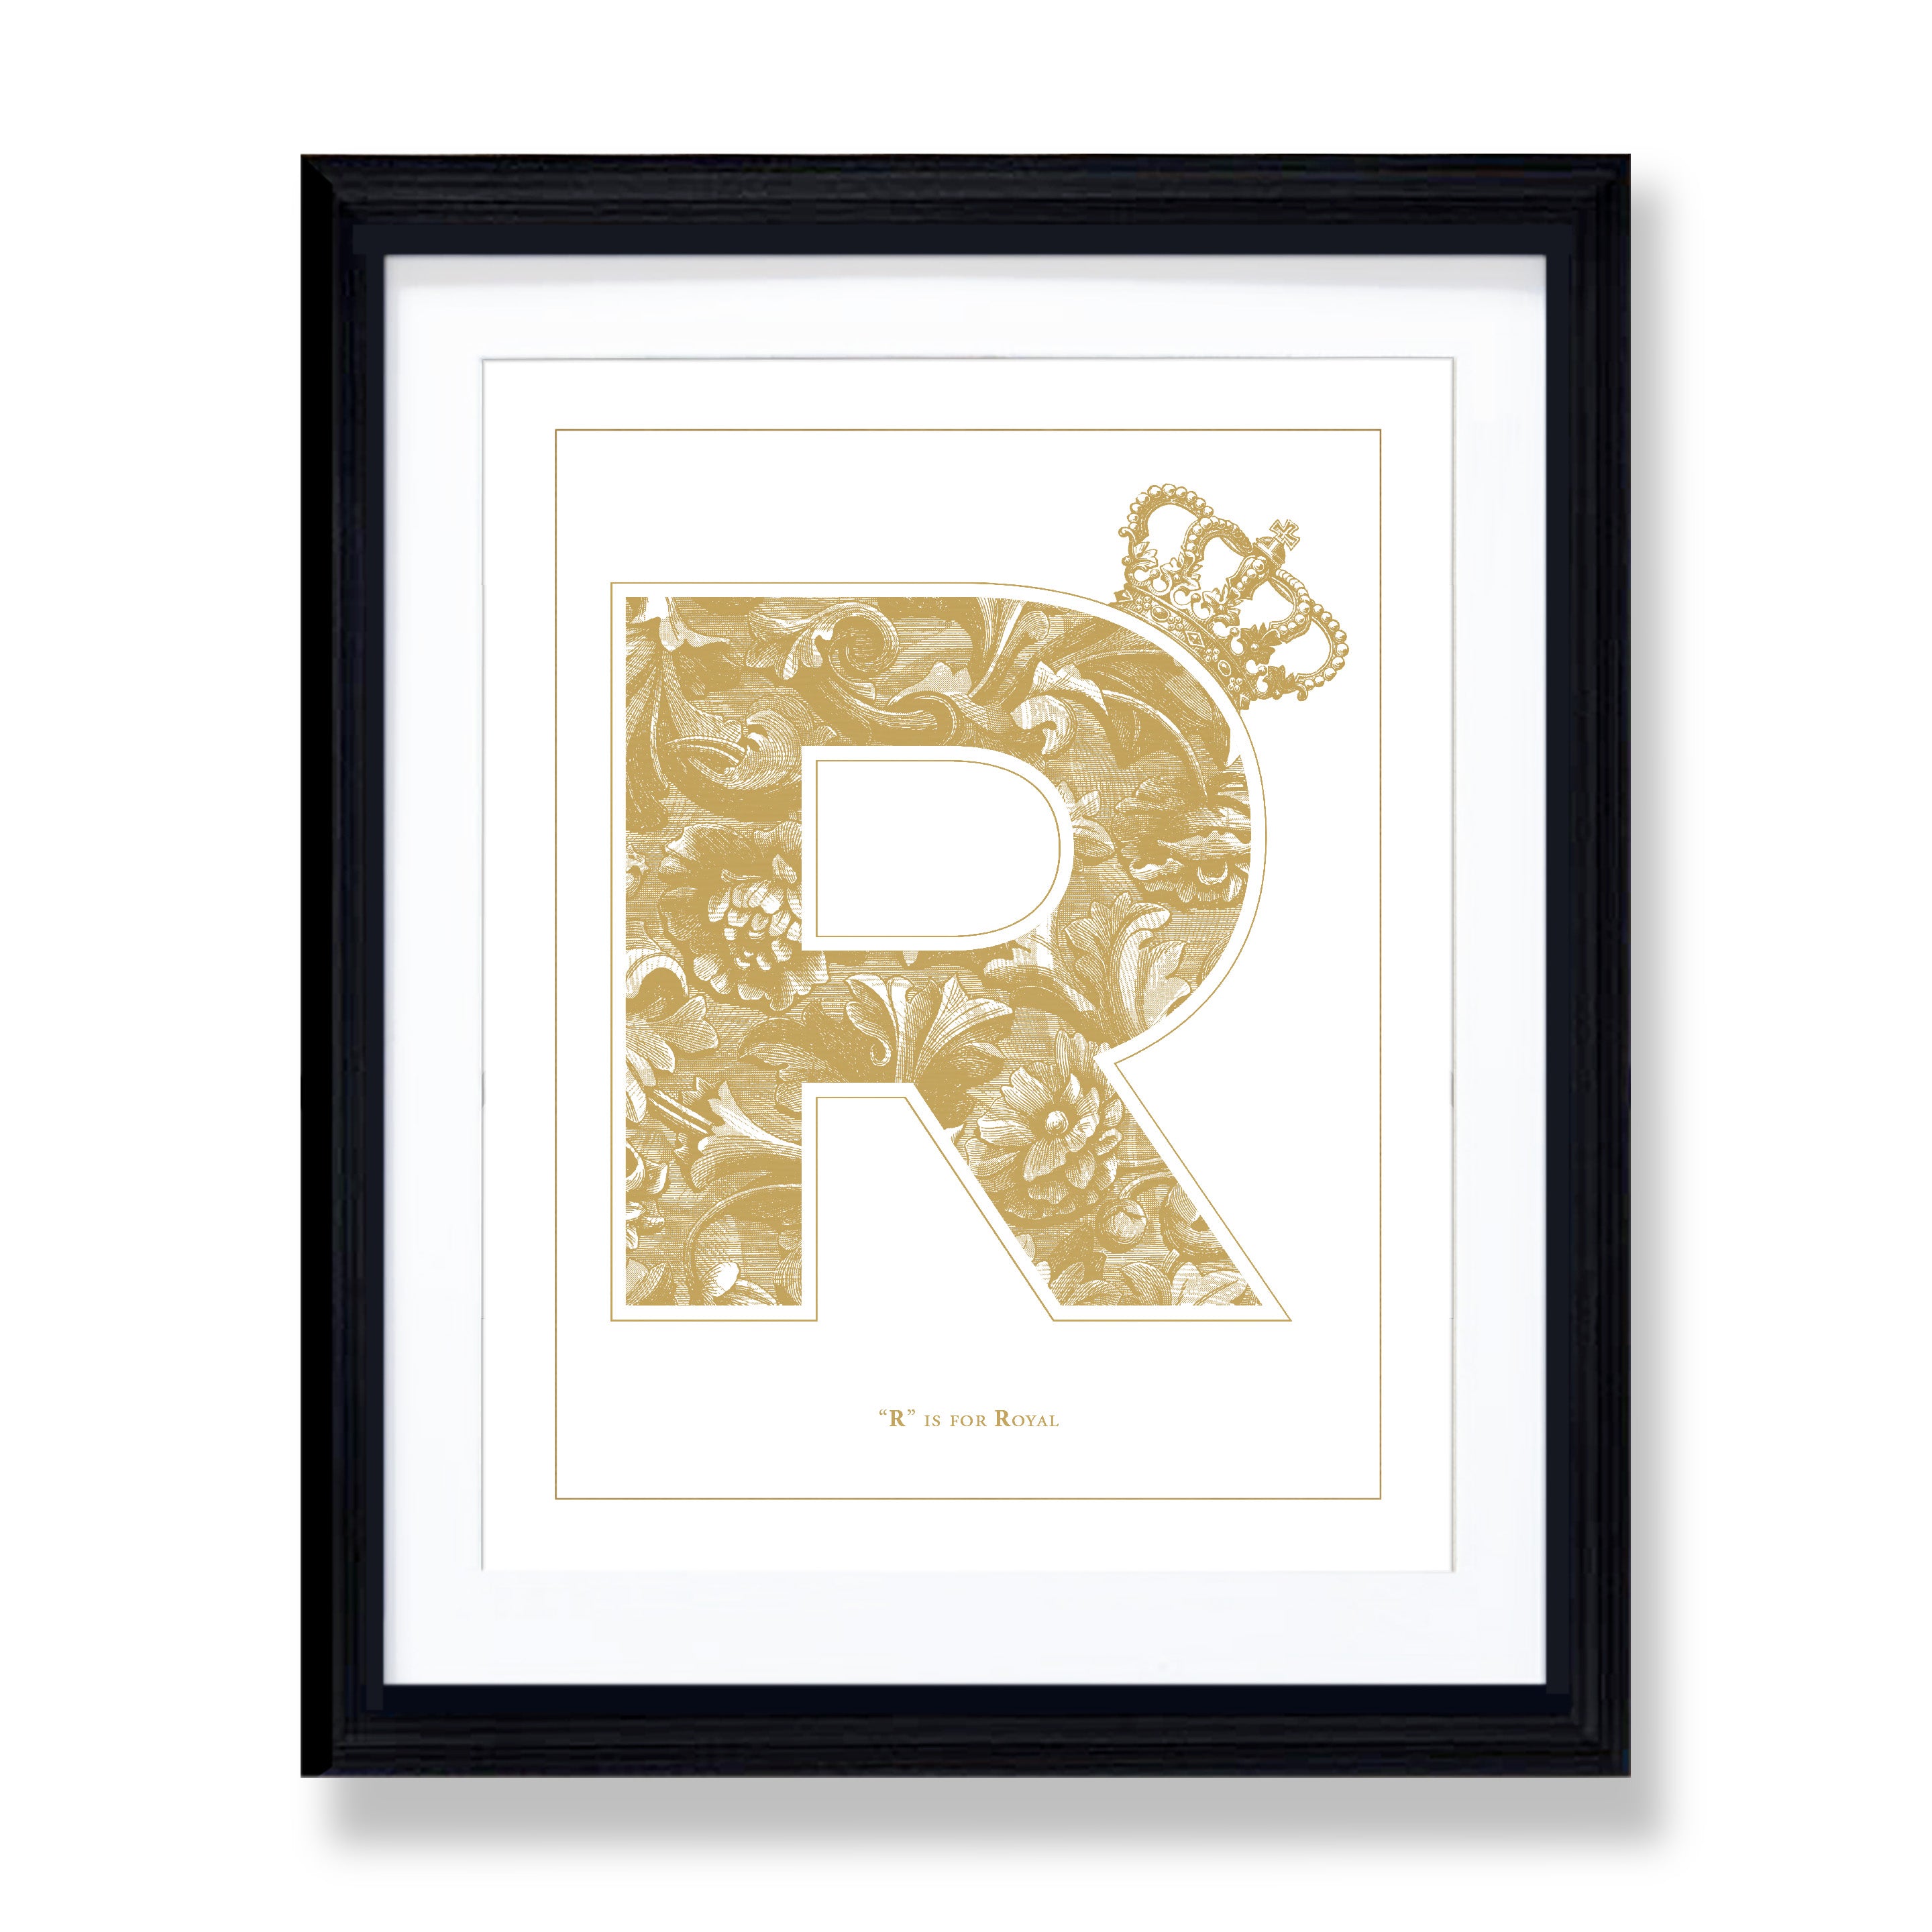 "R" is for Royal